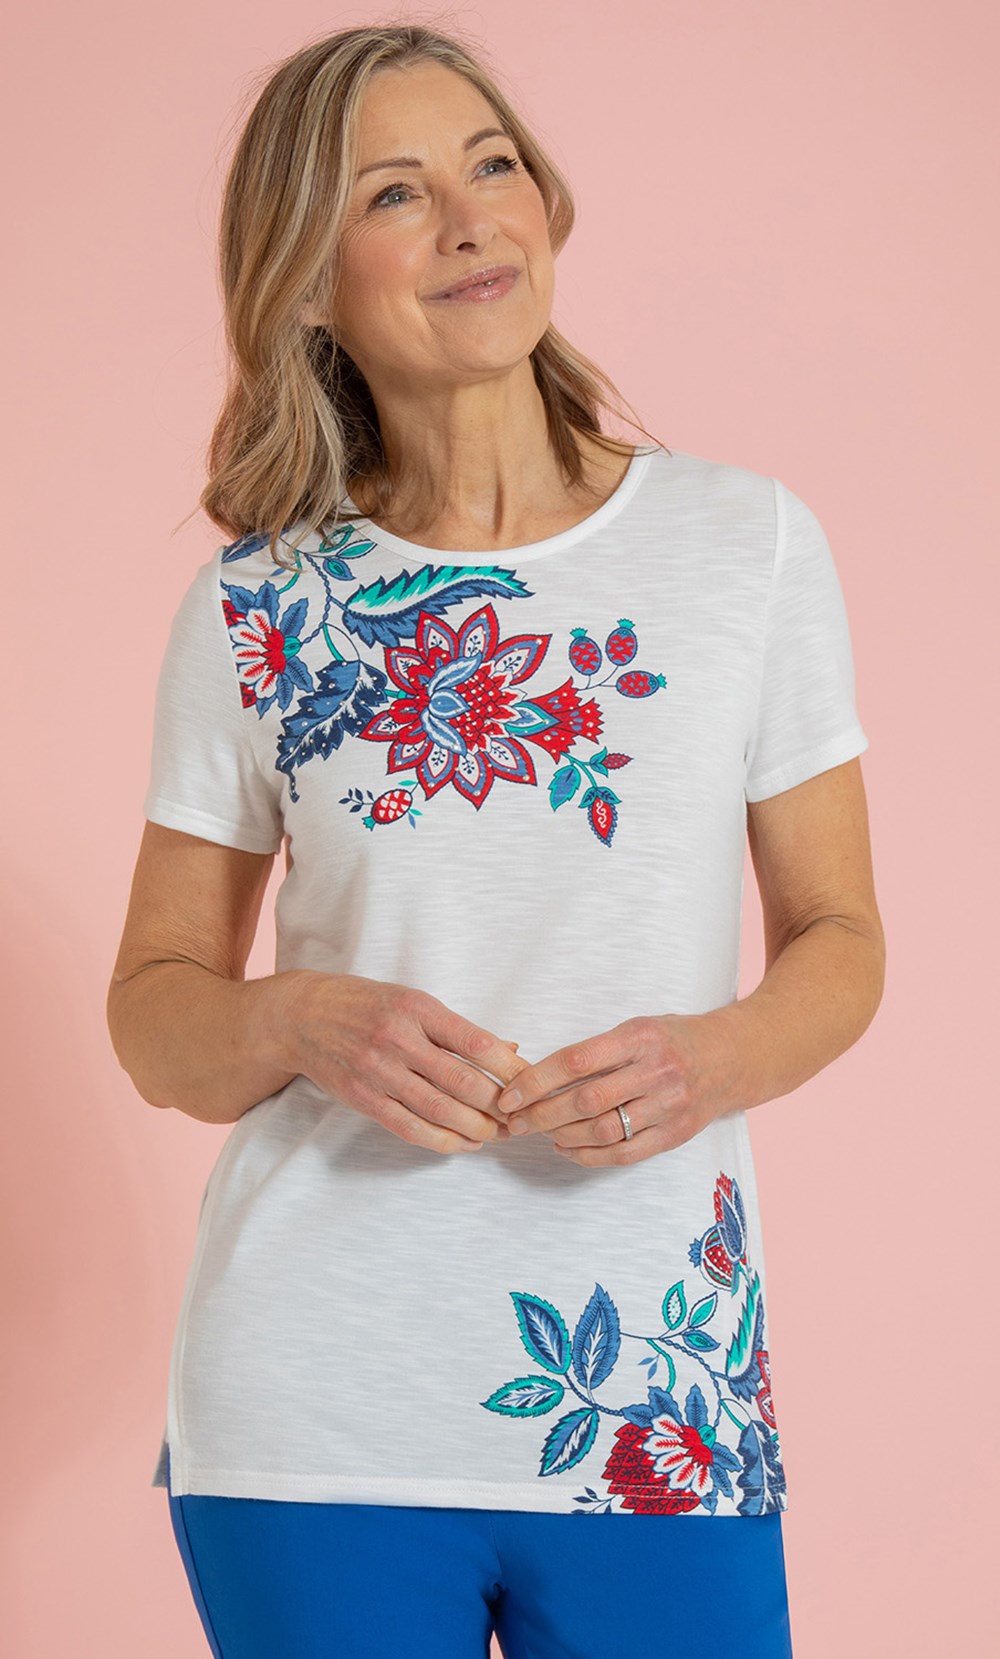 Anna Rose Embellished Placement Print Top in White | Klass